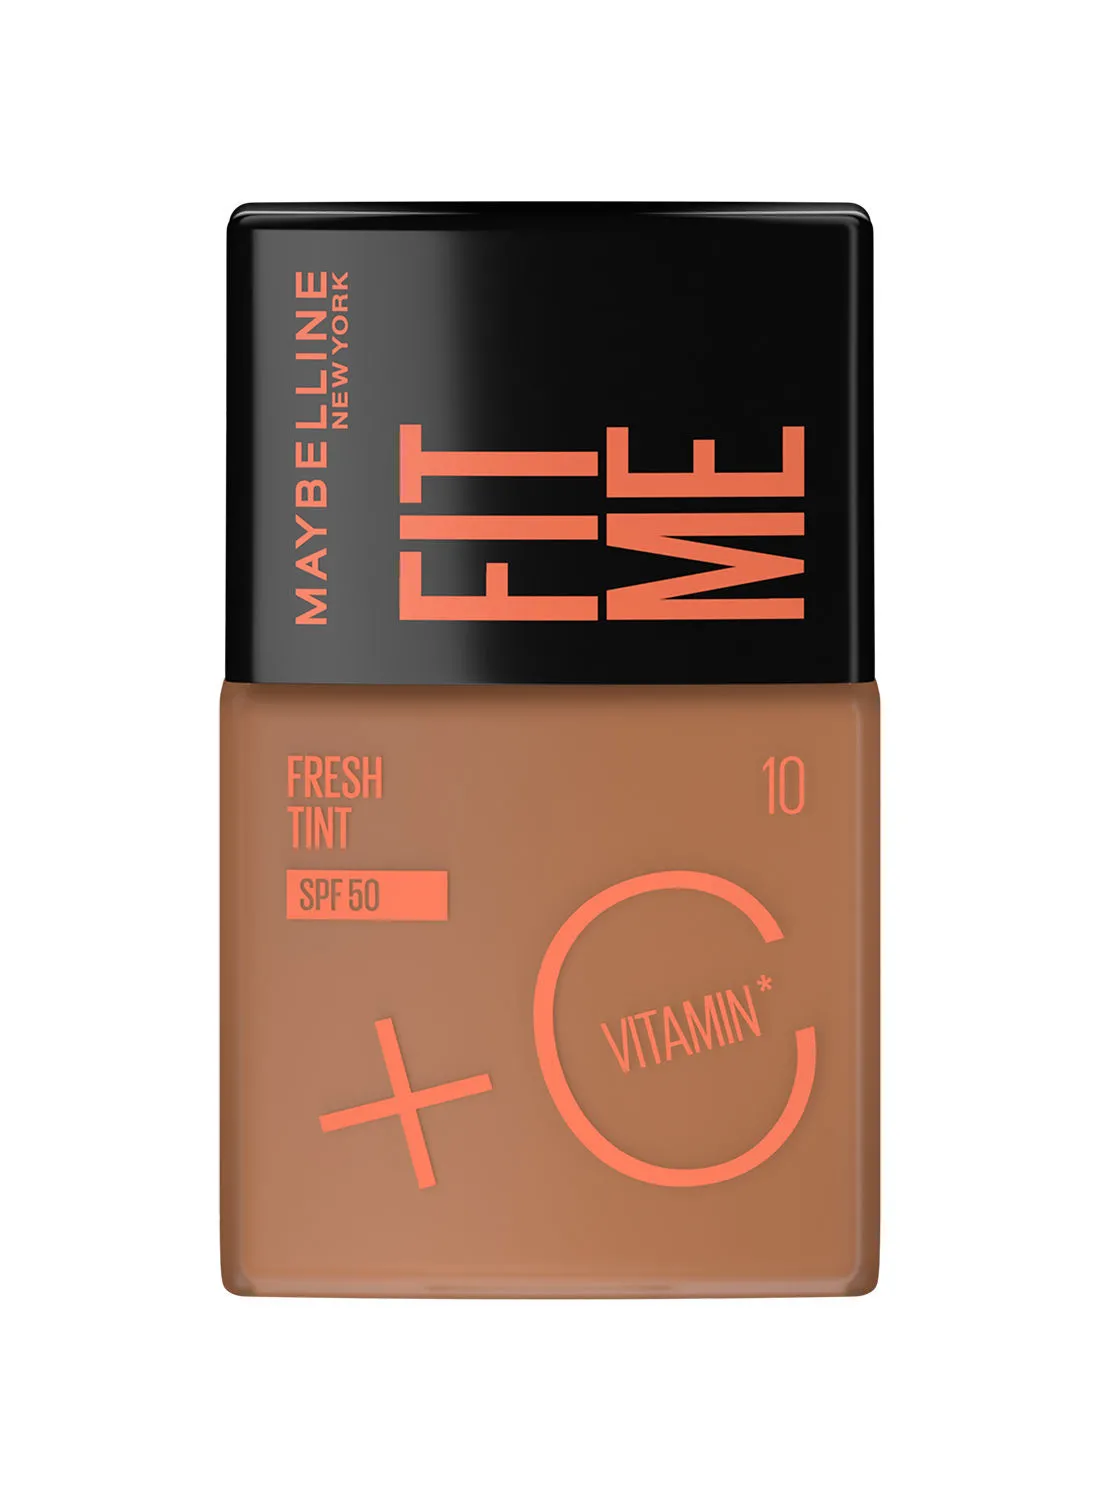 MAYBELLINE NEW YORK Maybelline New York, Fit Me Fresh Tint SPF 50 with Brightening Vitamin C, 10